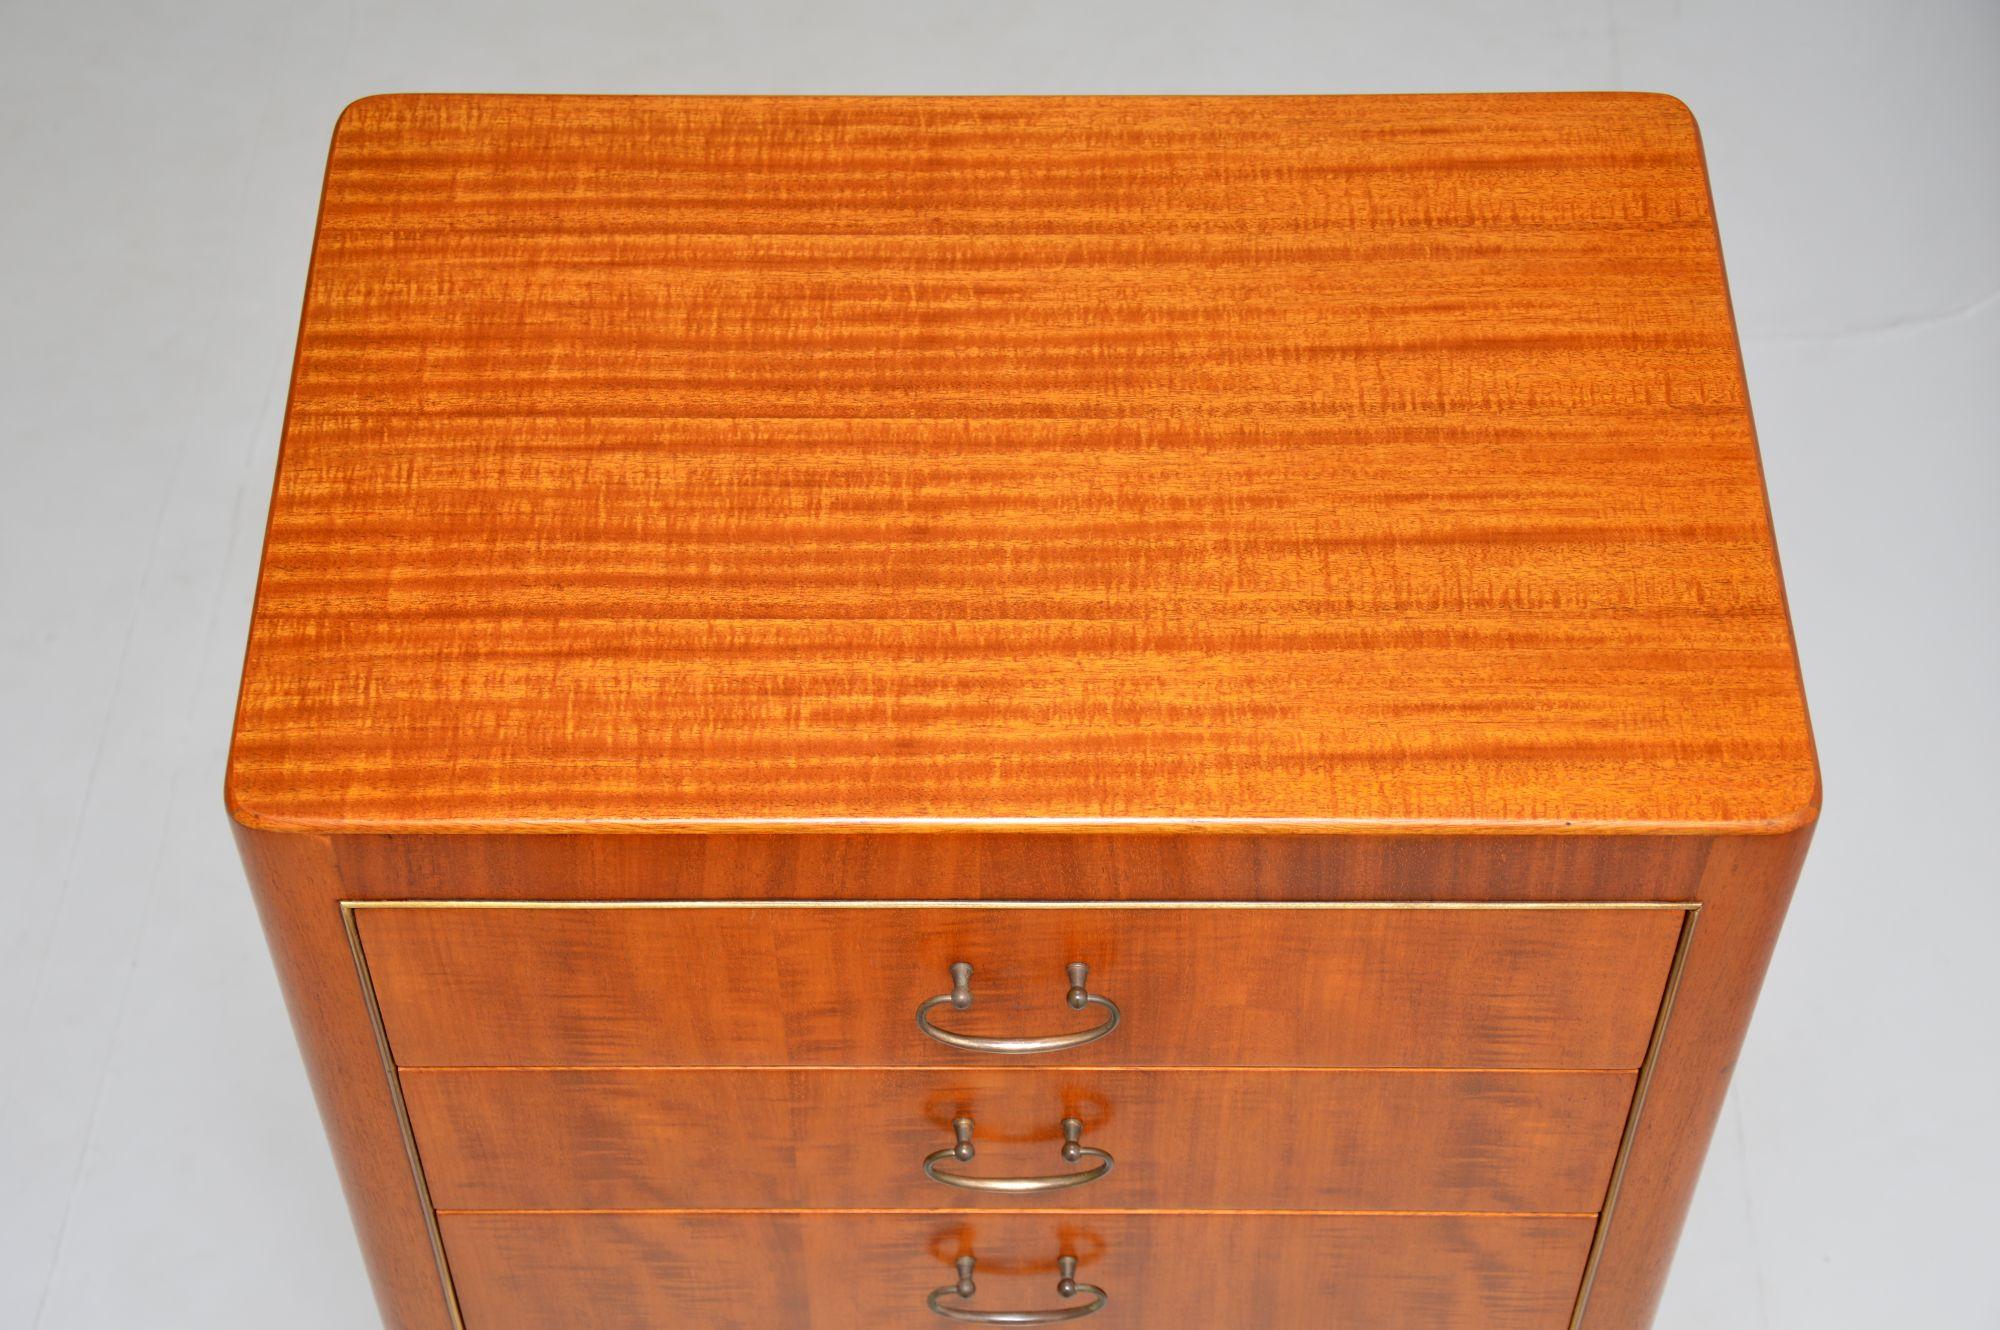 English Mahogany and Brass Vintage Tallboy Chest of Drawers